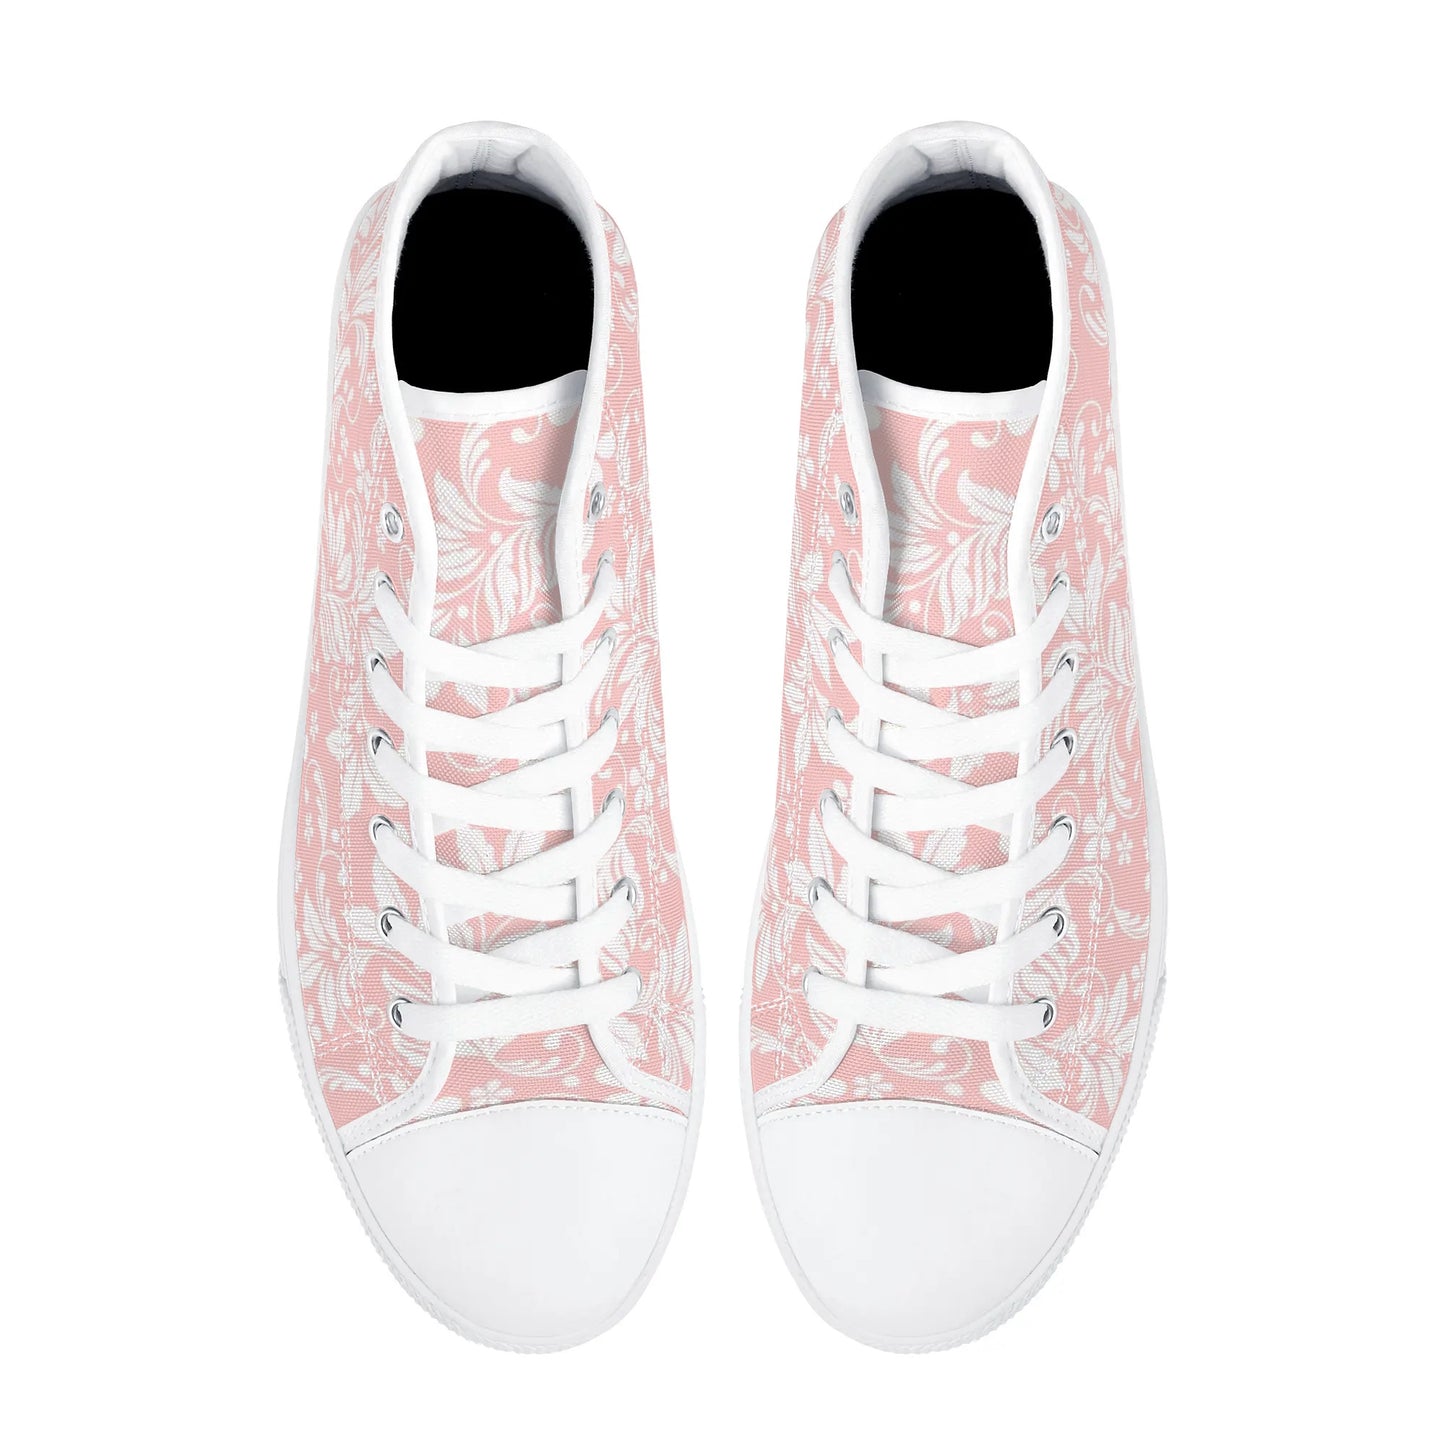 Pink Floral Women High Top Shoes, Flowers Lace Up Sneakers Footwear Canvas Streetwear Ladies Girls White Trainers Designer Gift